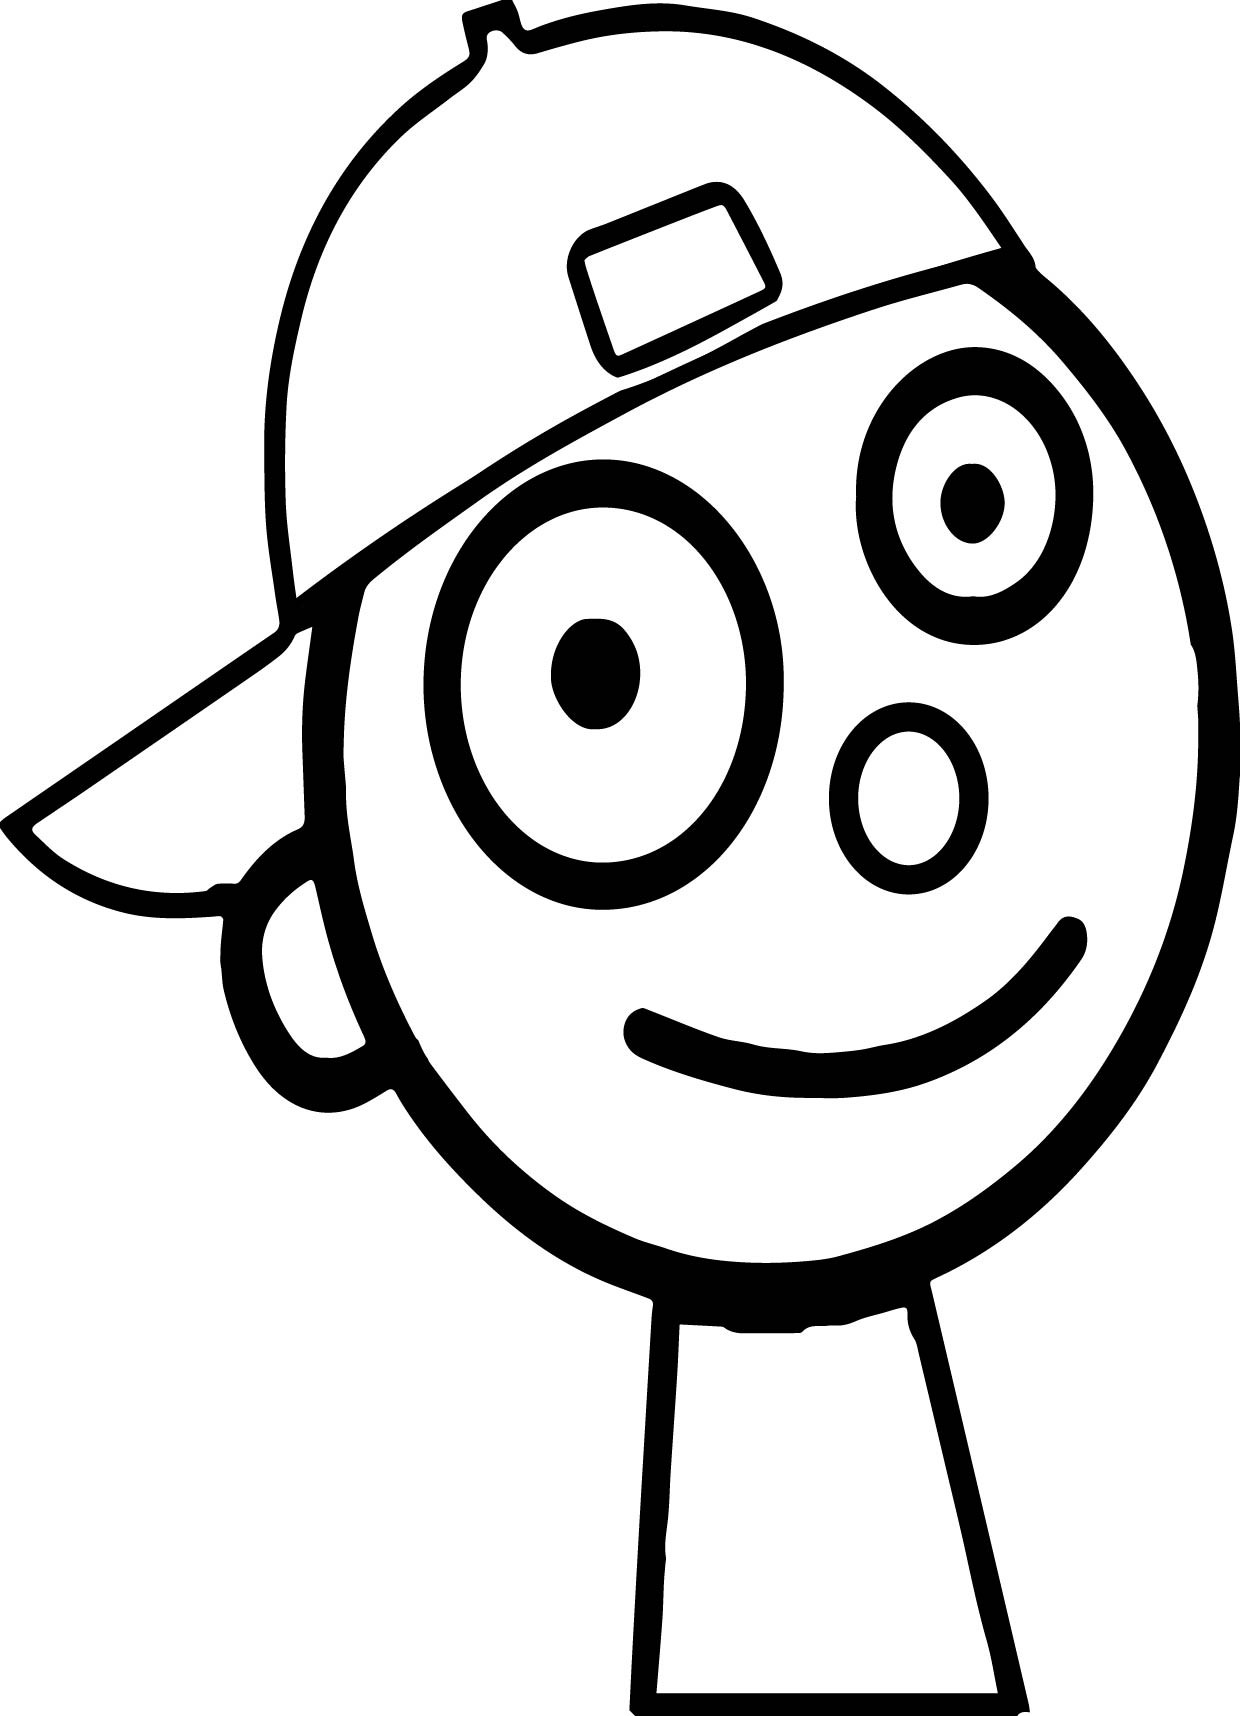 Pbs Kids Coloring Pages
 Pbs Kids Colouring Pages Sketch Coloring Page